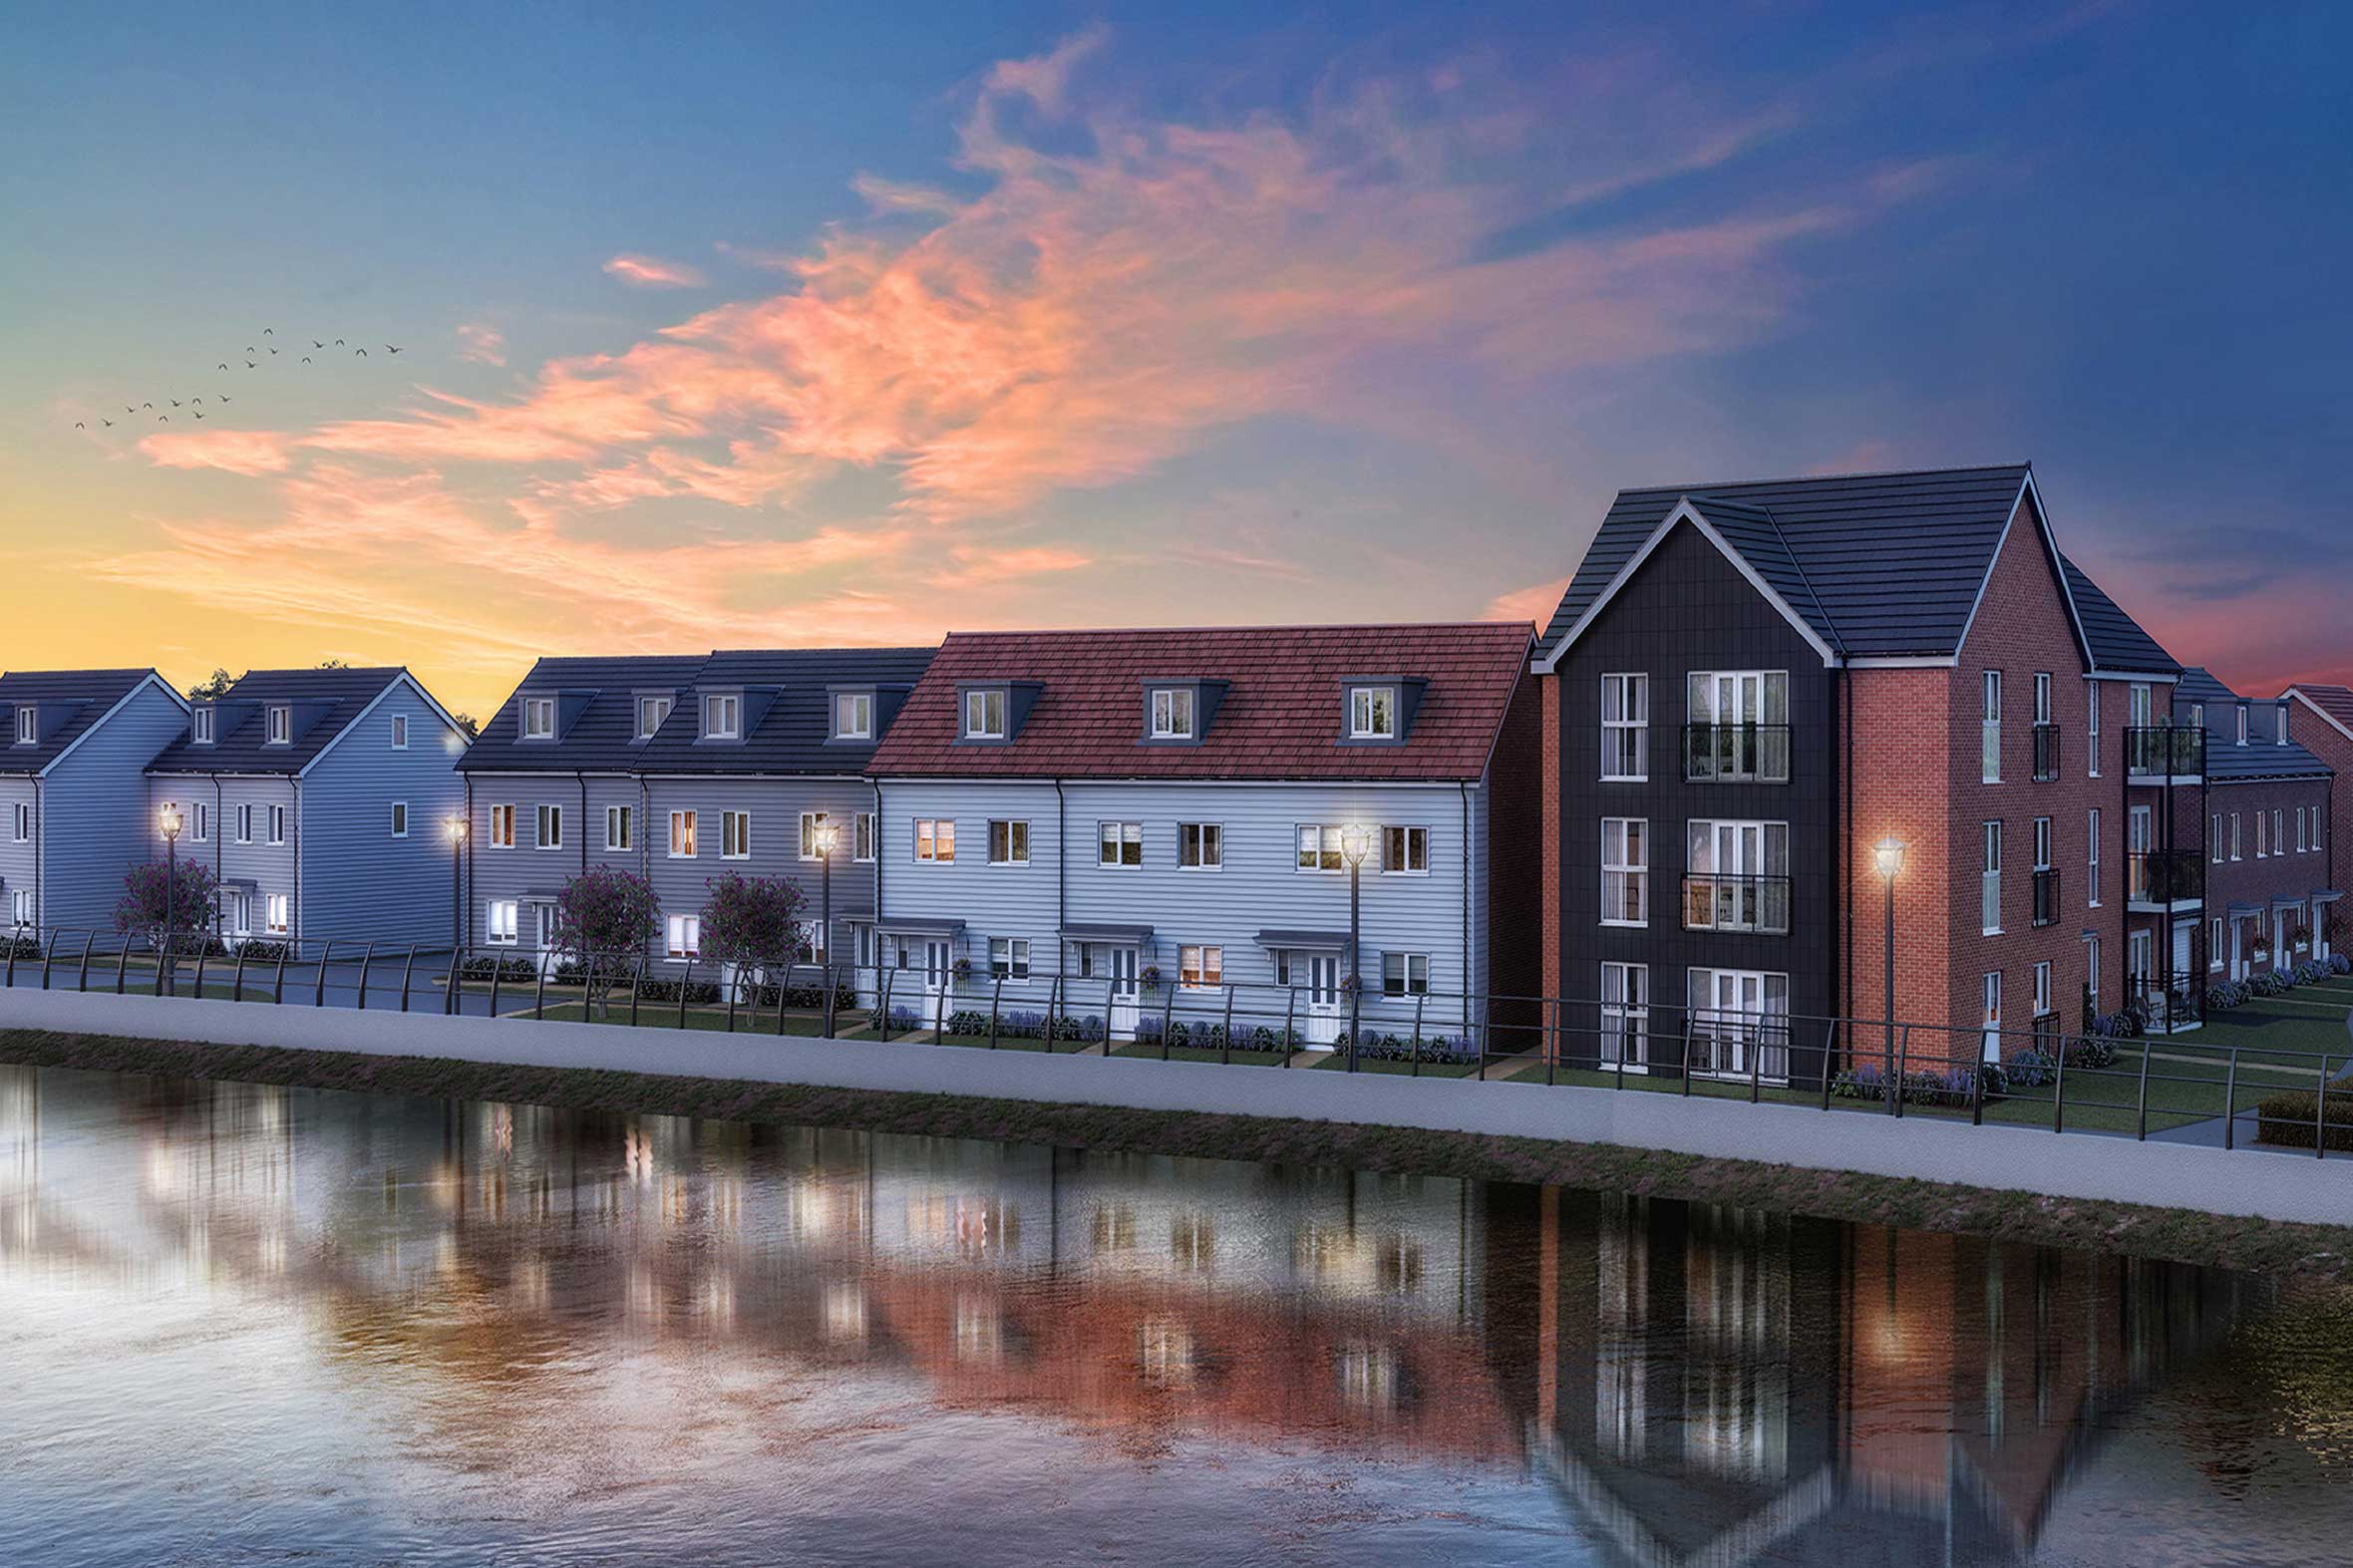 England: US private equity firm strikes deal to buy Vistry homes